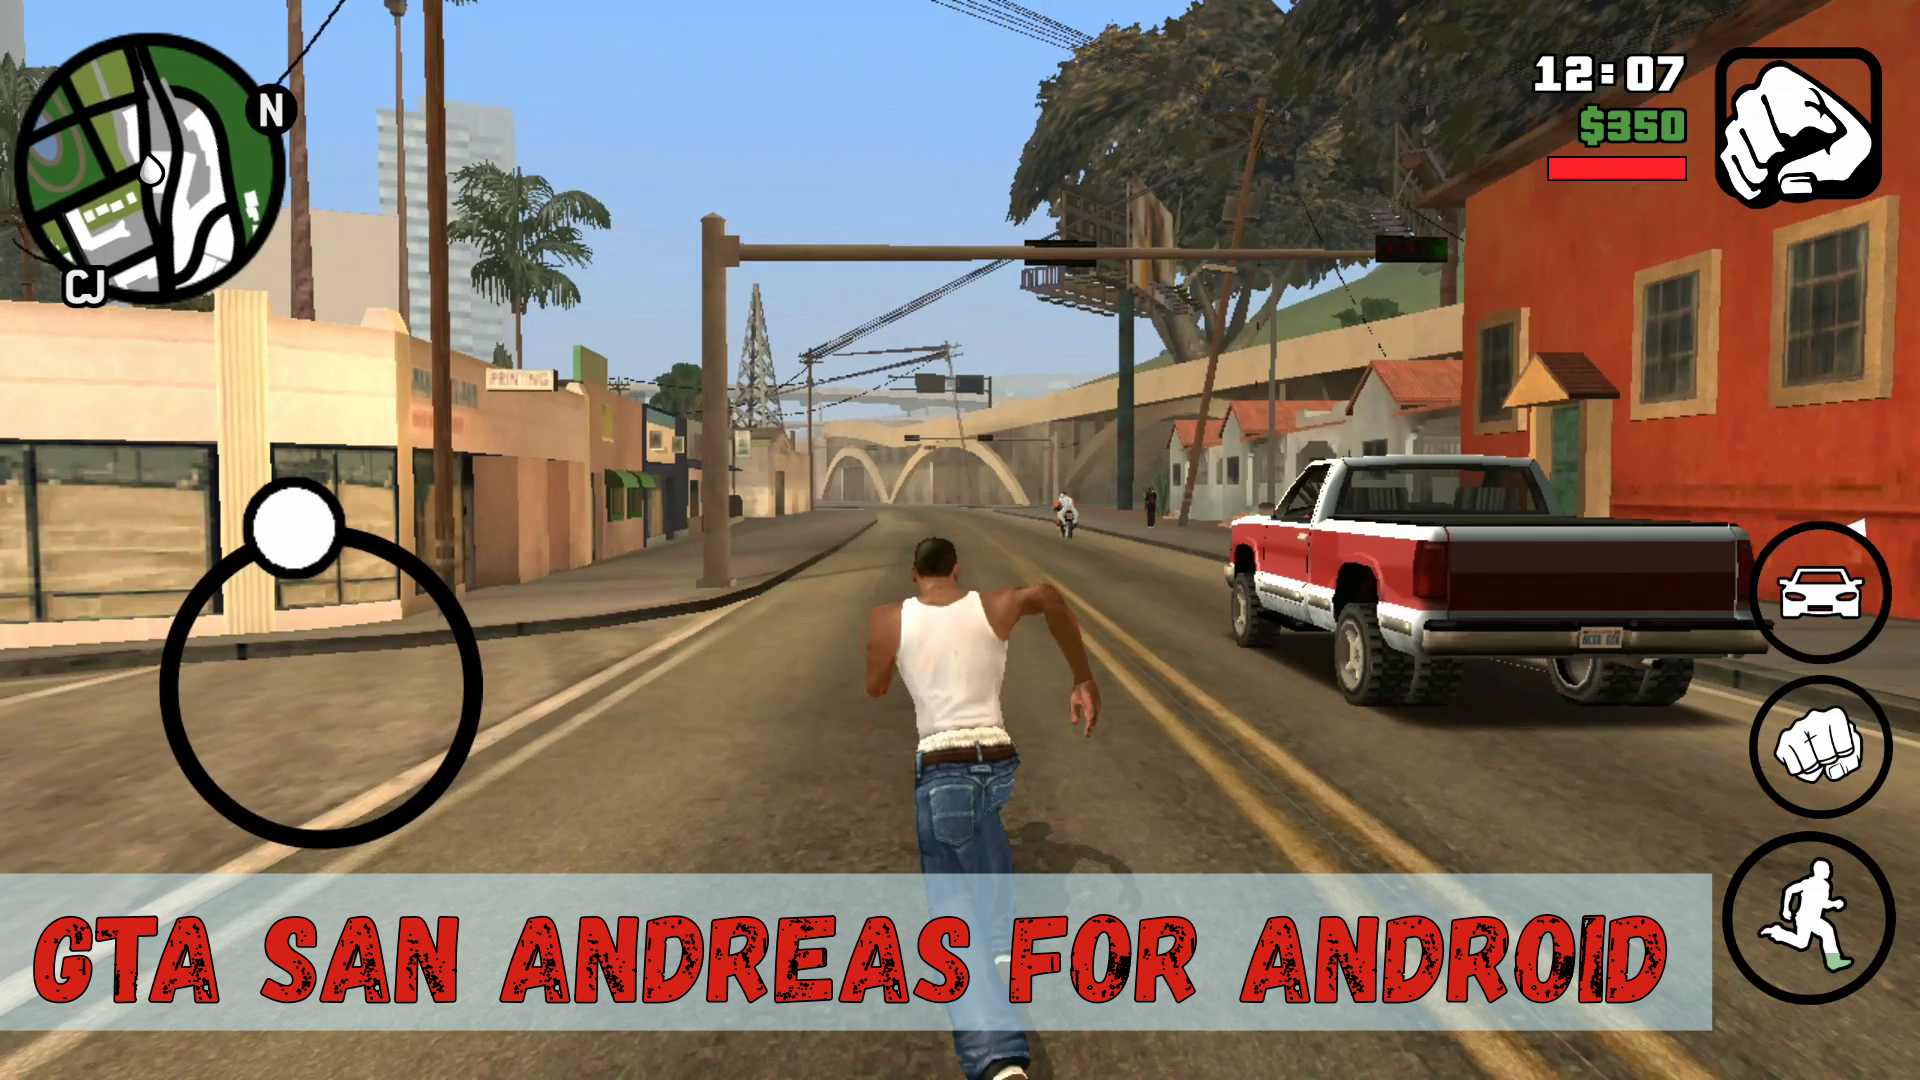 Download Game Grand Theft Auto San Andreas Mod Apk Data - hqever